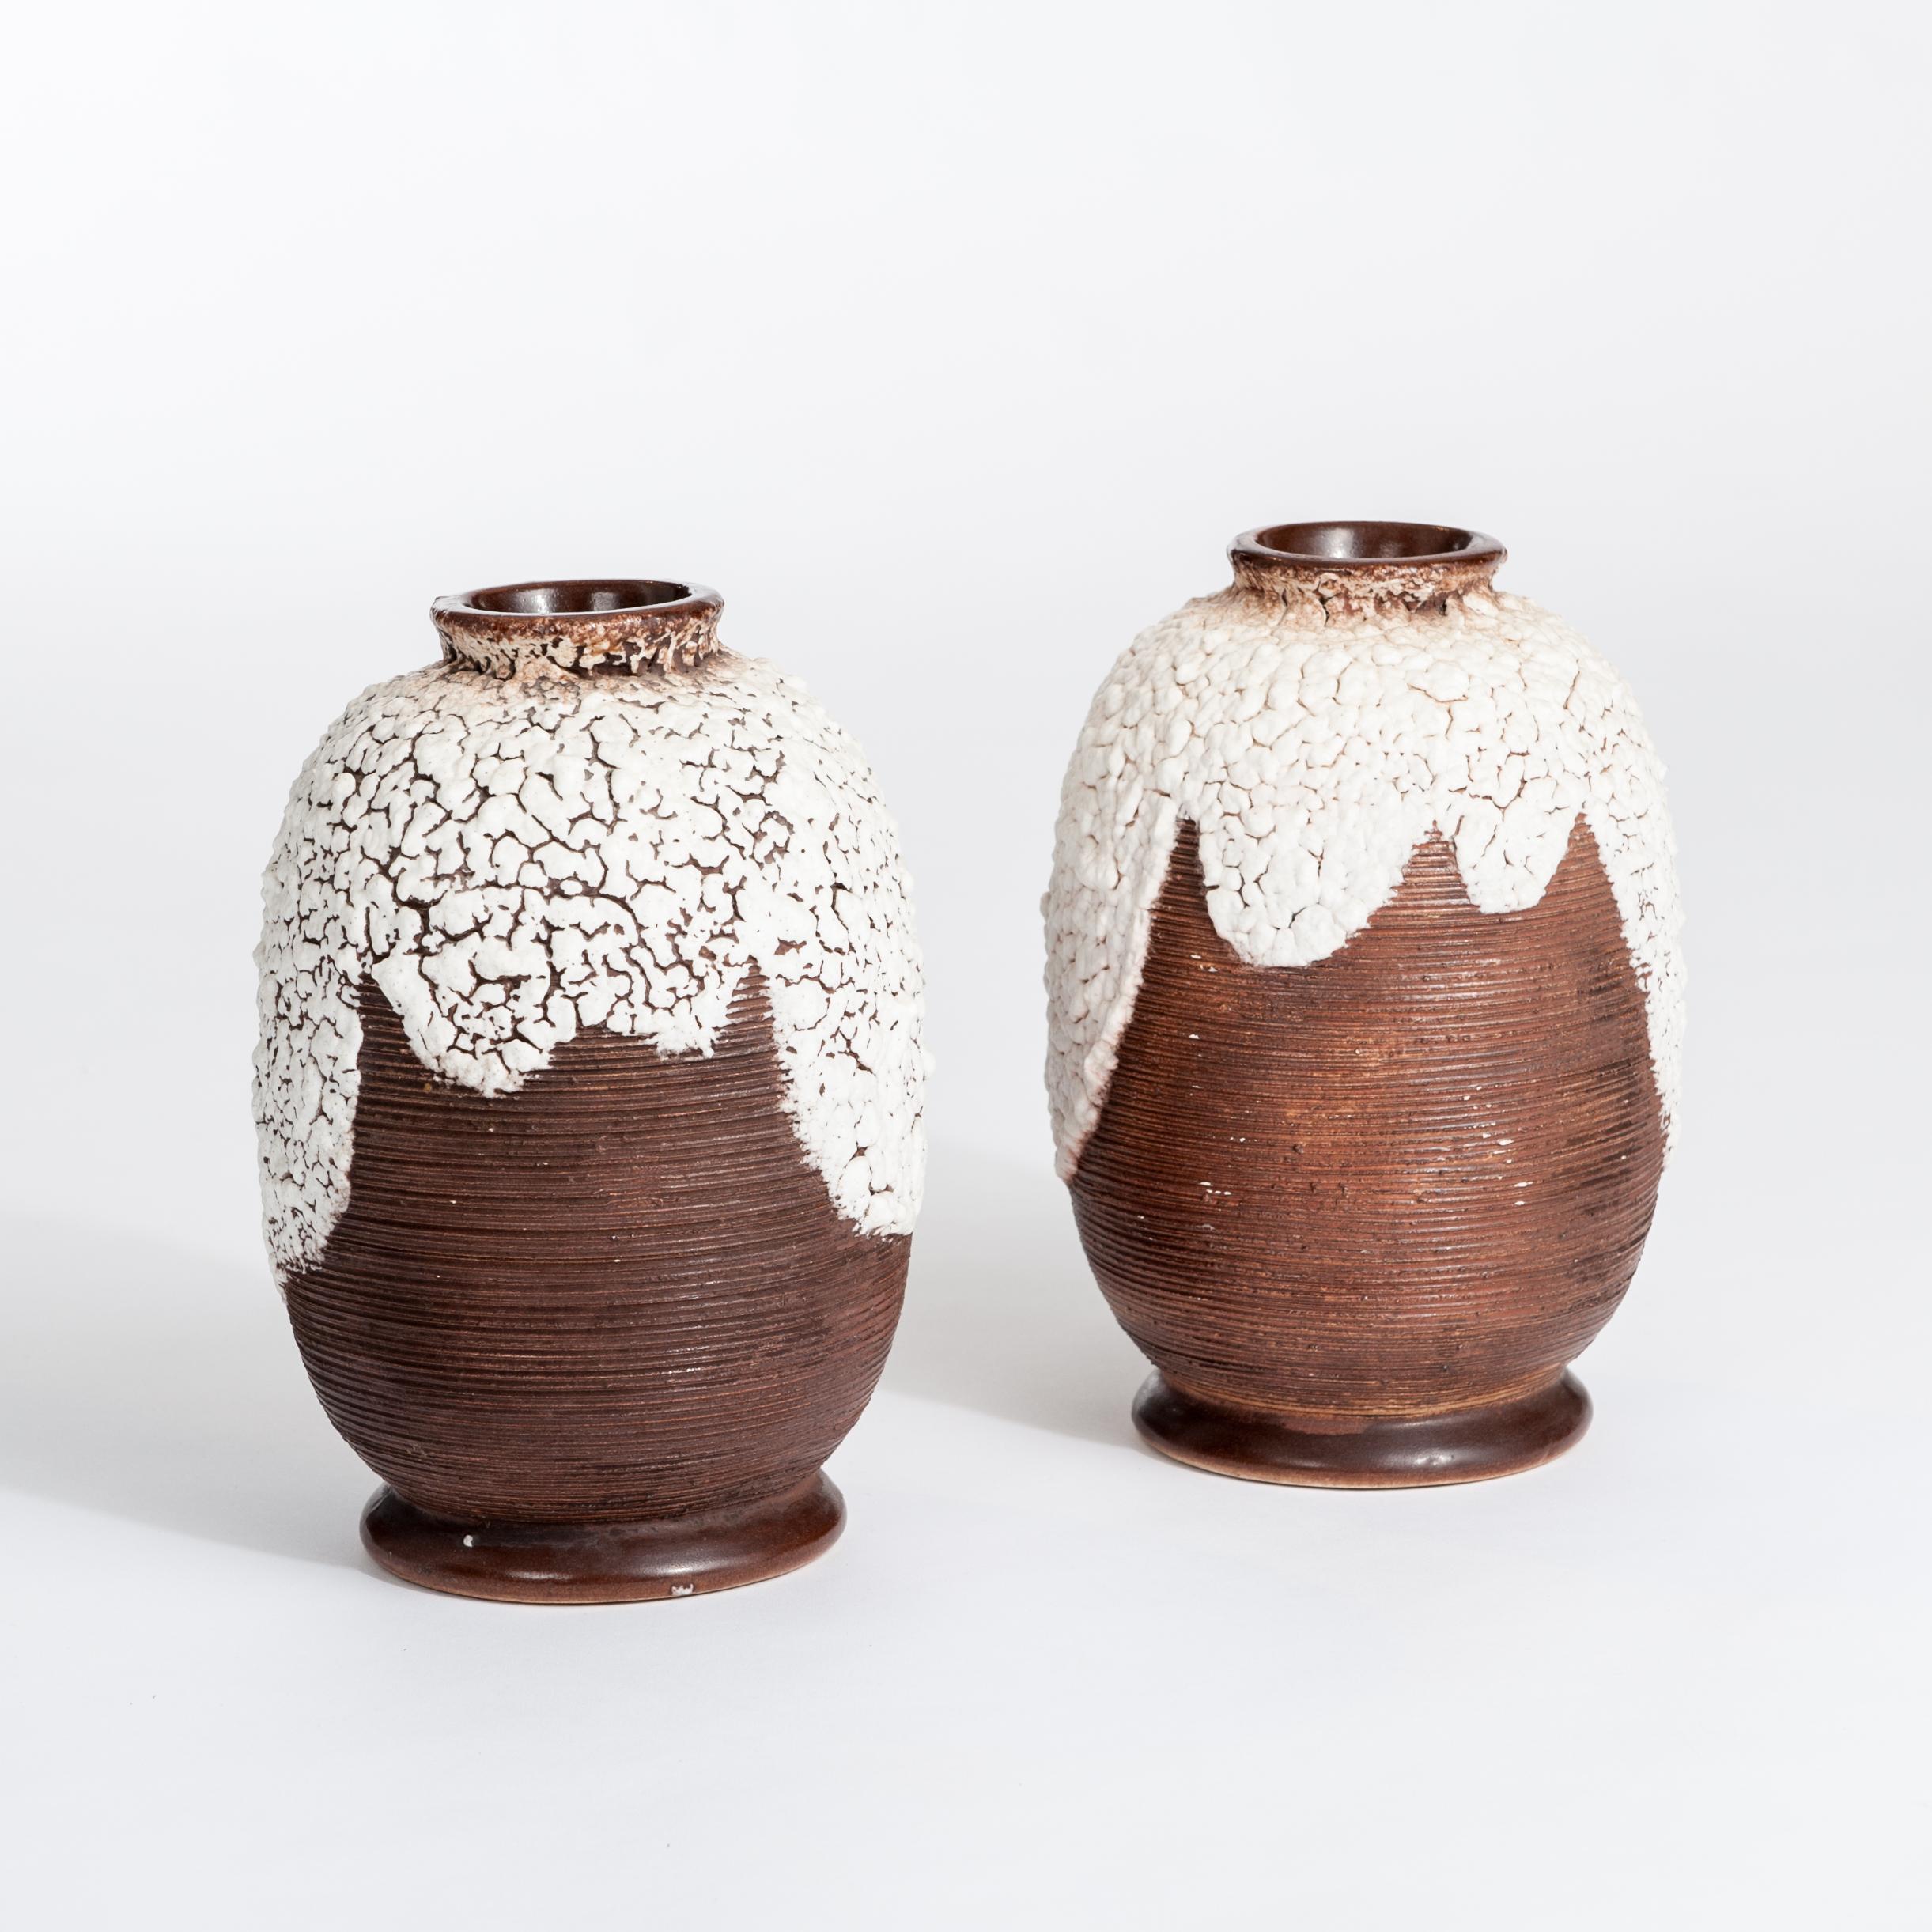 Pair of French Art Deco ceramic vases brown-offwhite signed by Louis Auguste Dage.
The dark brown surface has a fine ribbed structure, the upper part displays an offwhite colored ceramic 